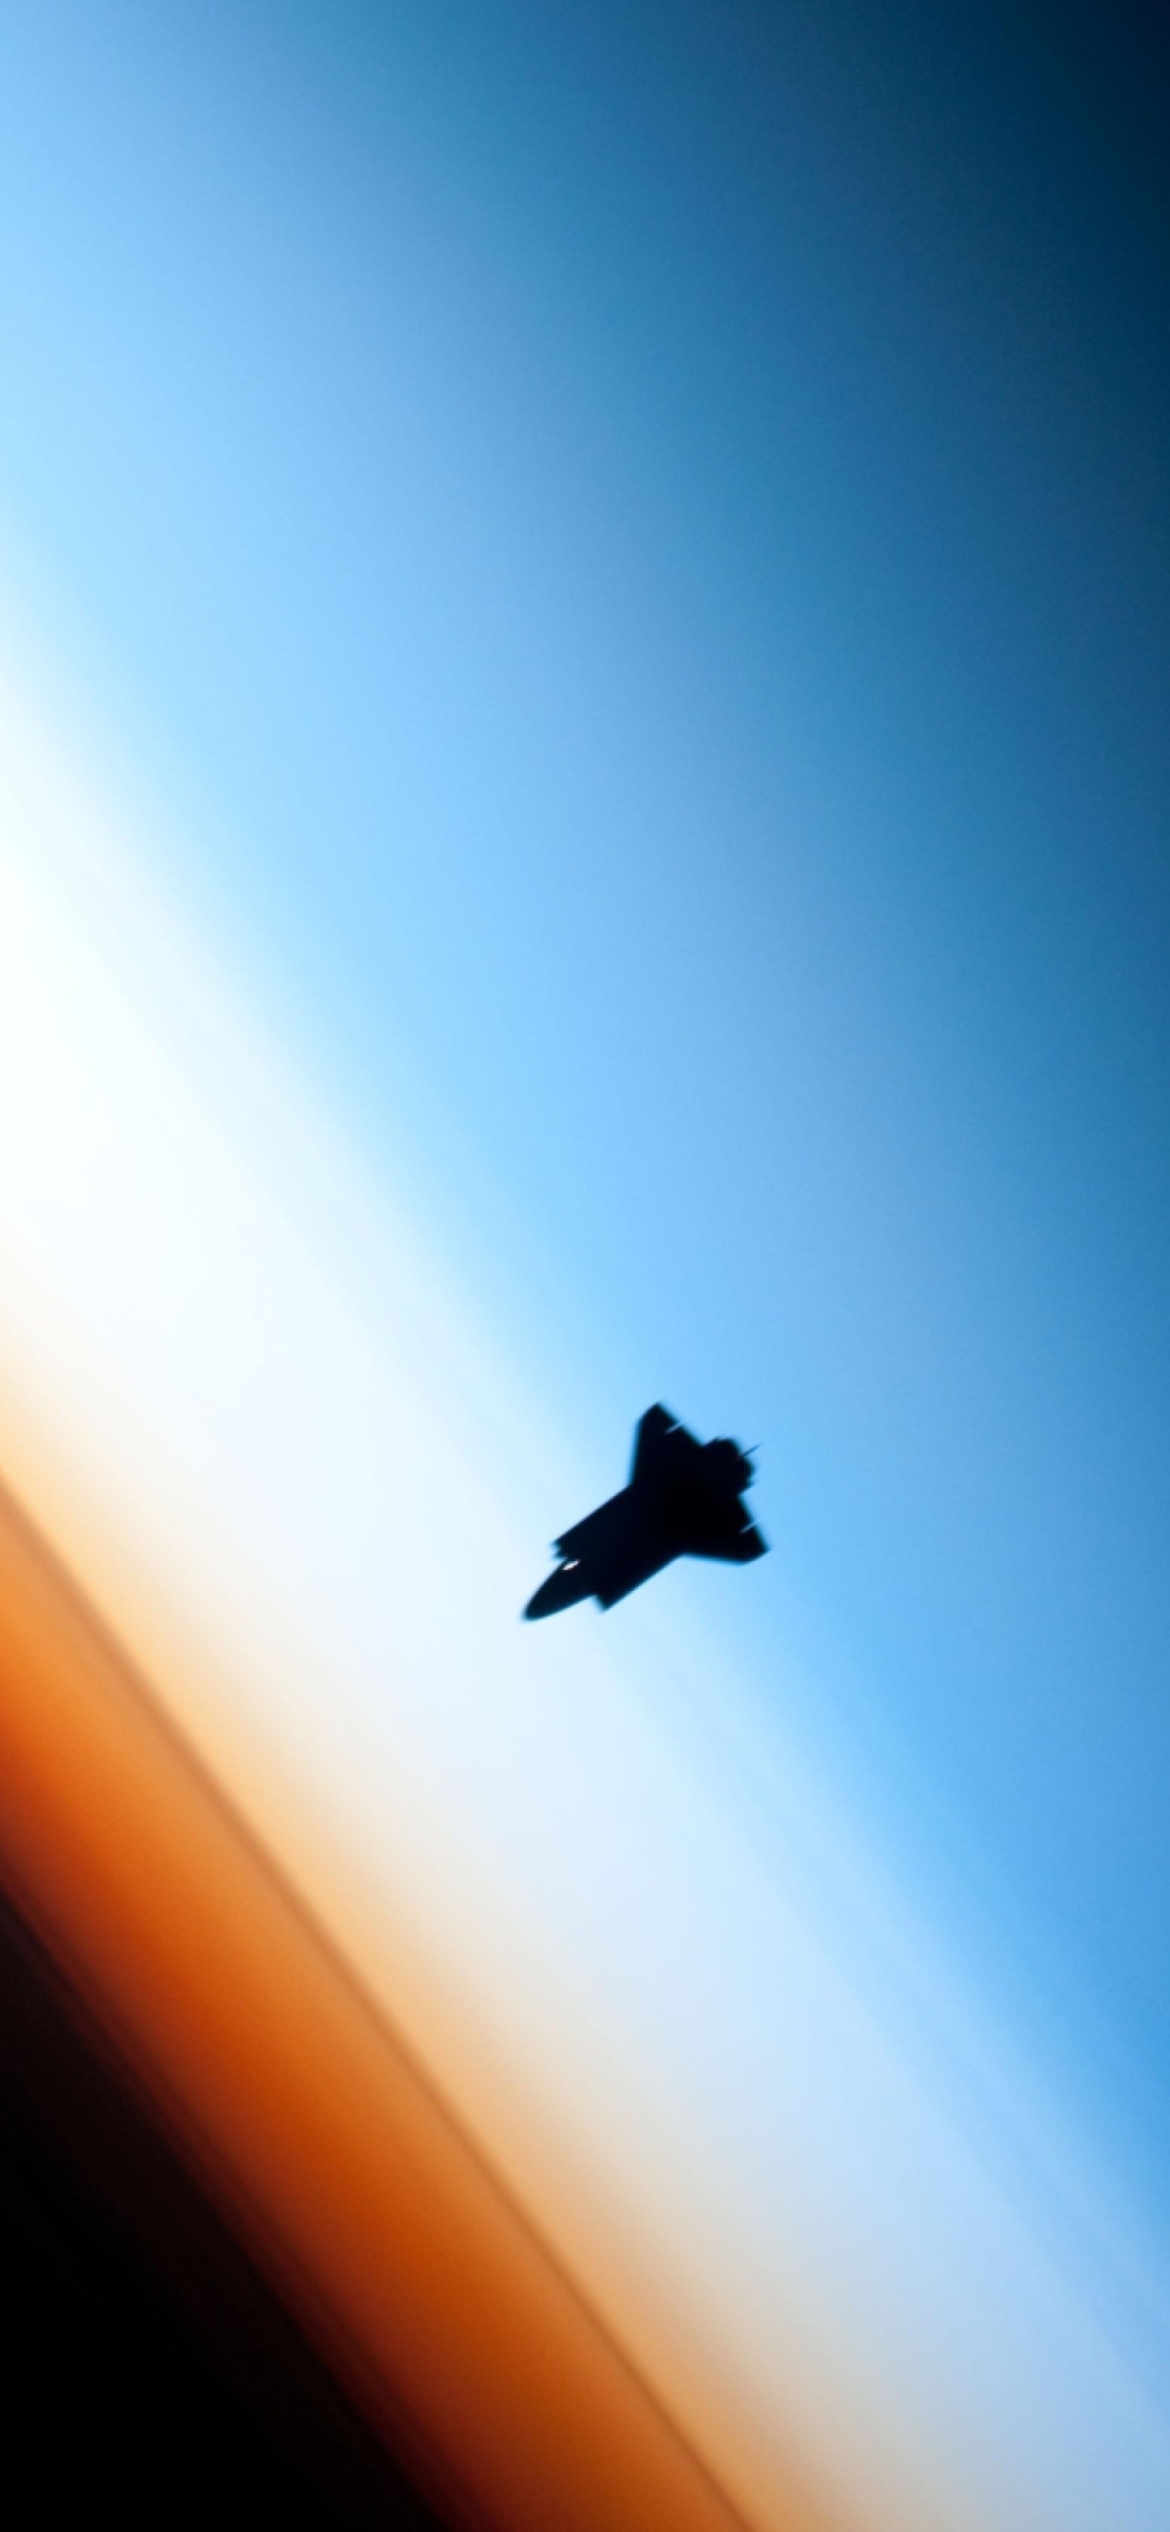 Shuttle In Outer Space wallpaper 1170x2532